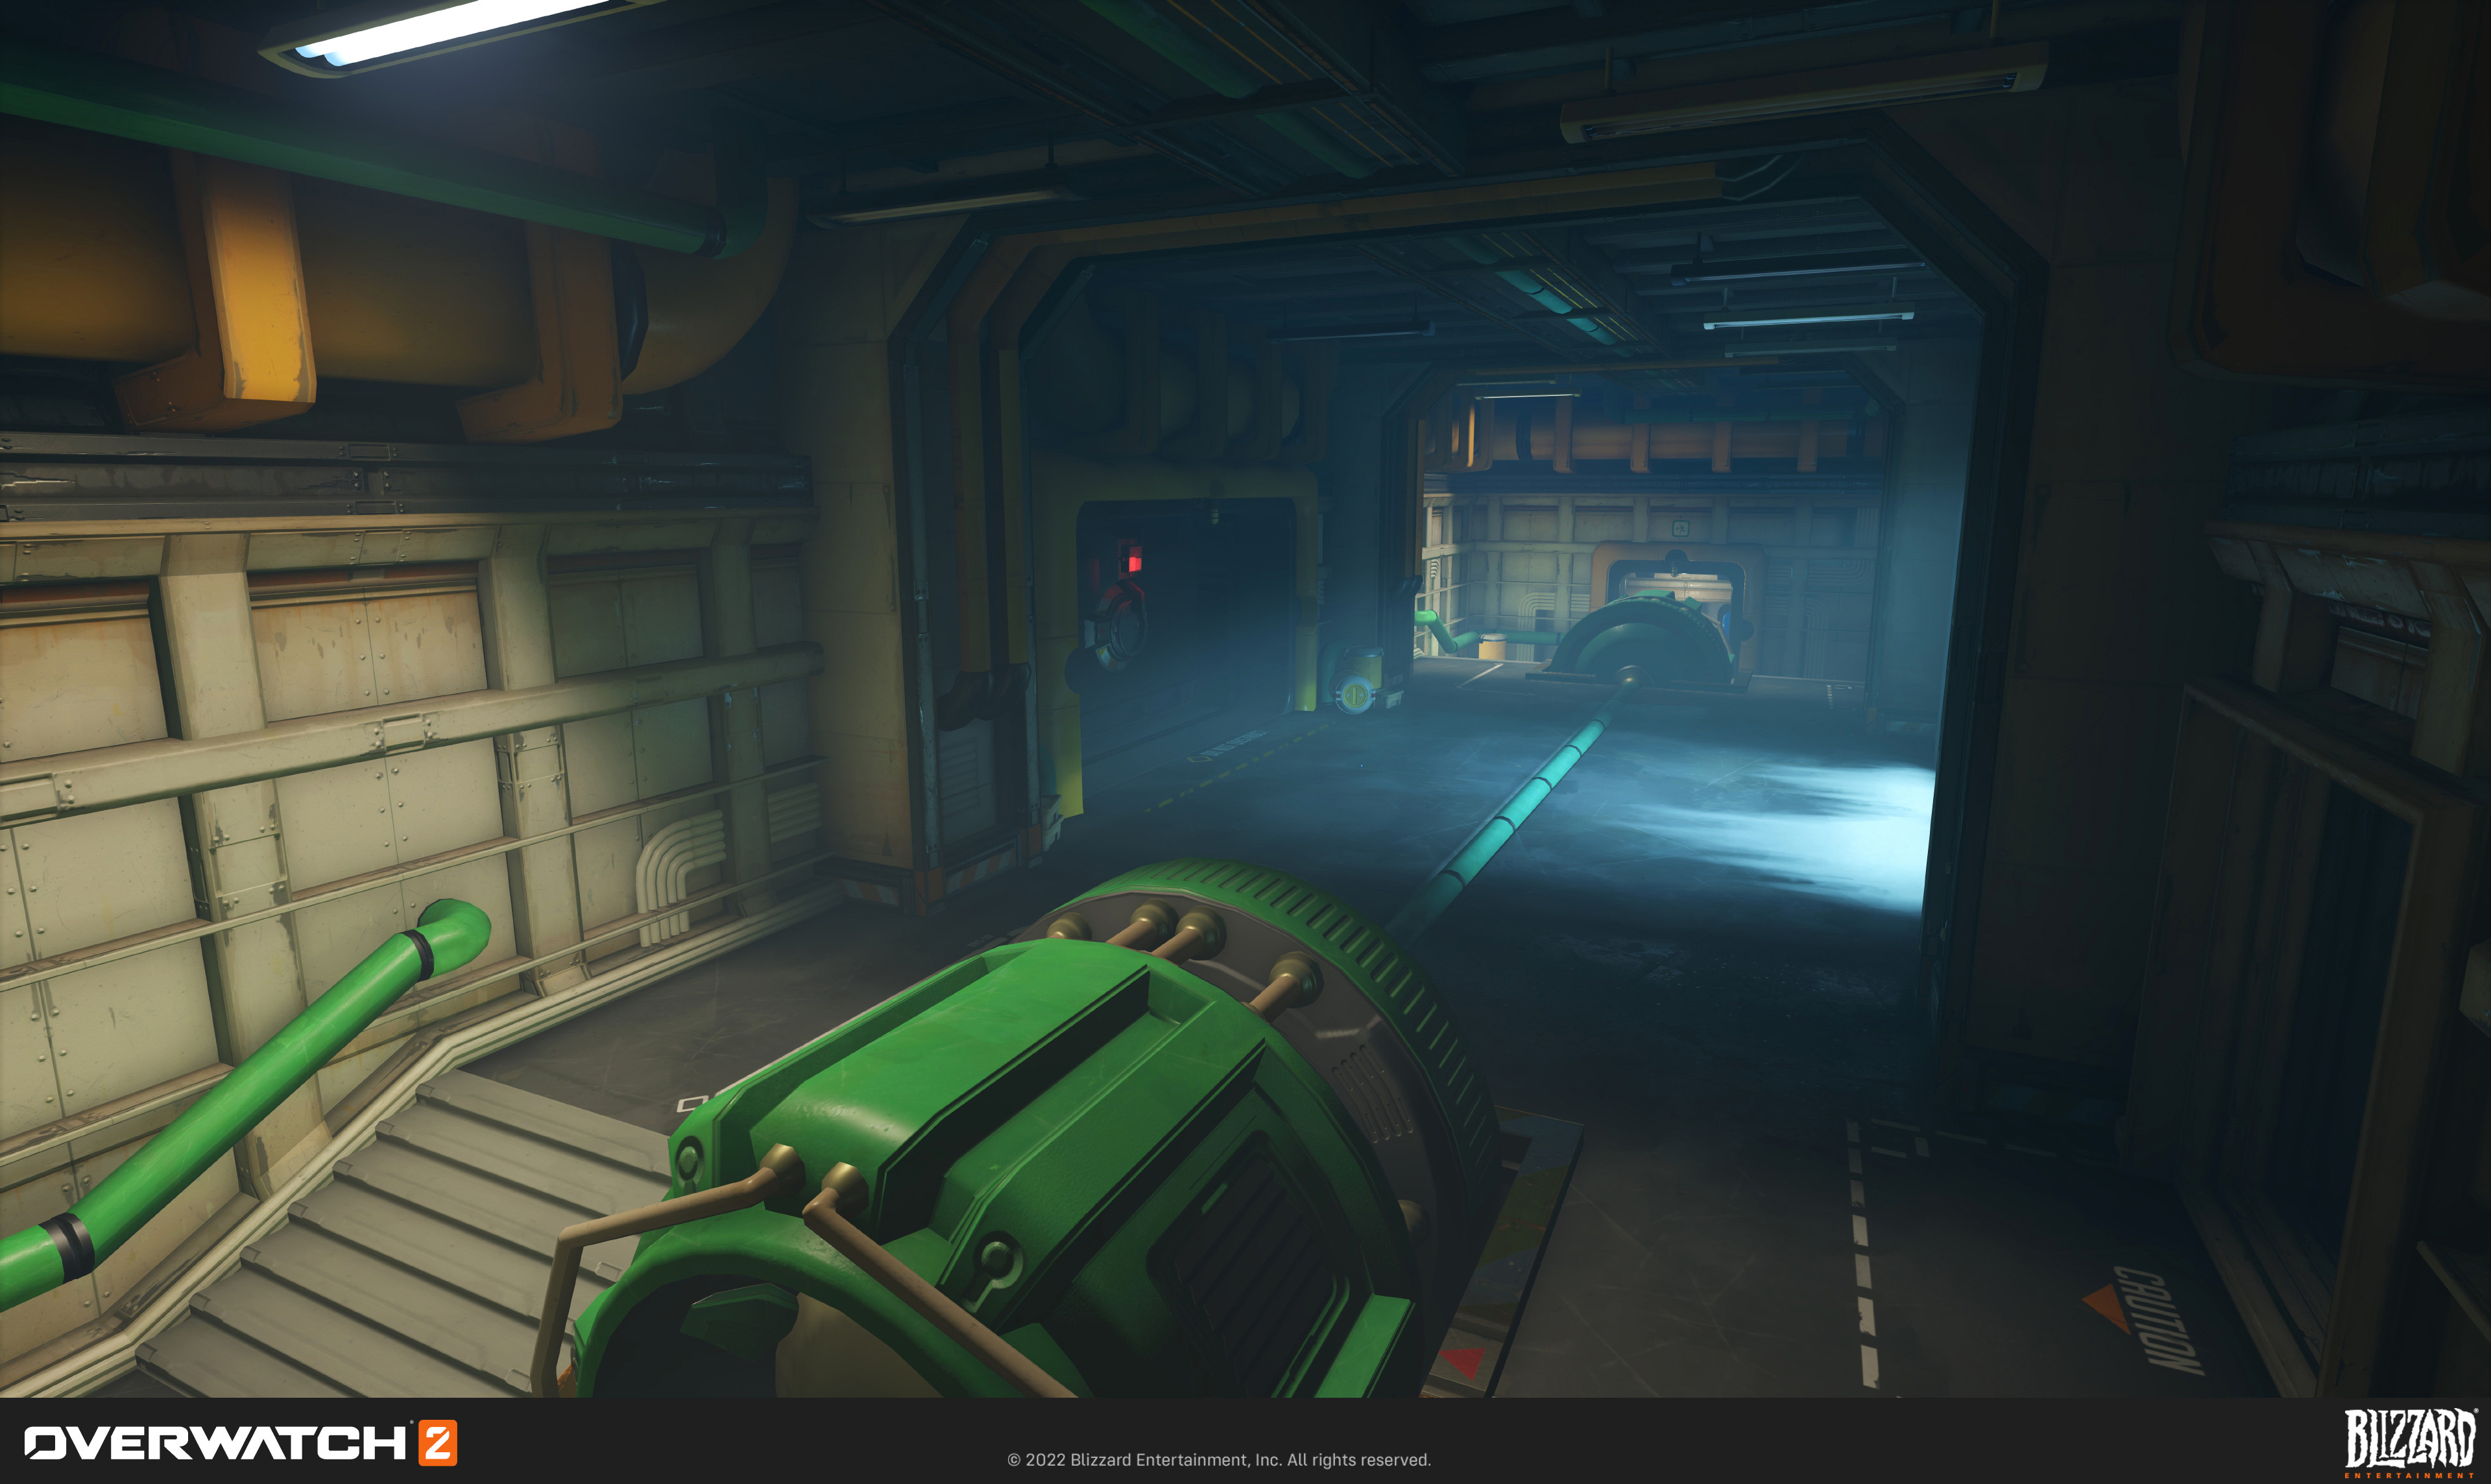 Icebreaker engine room - Assets were created by outsourcing and Justin McMillan